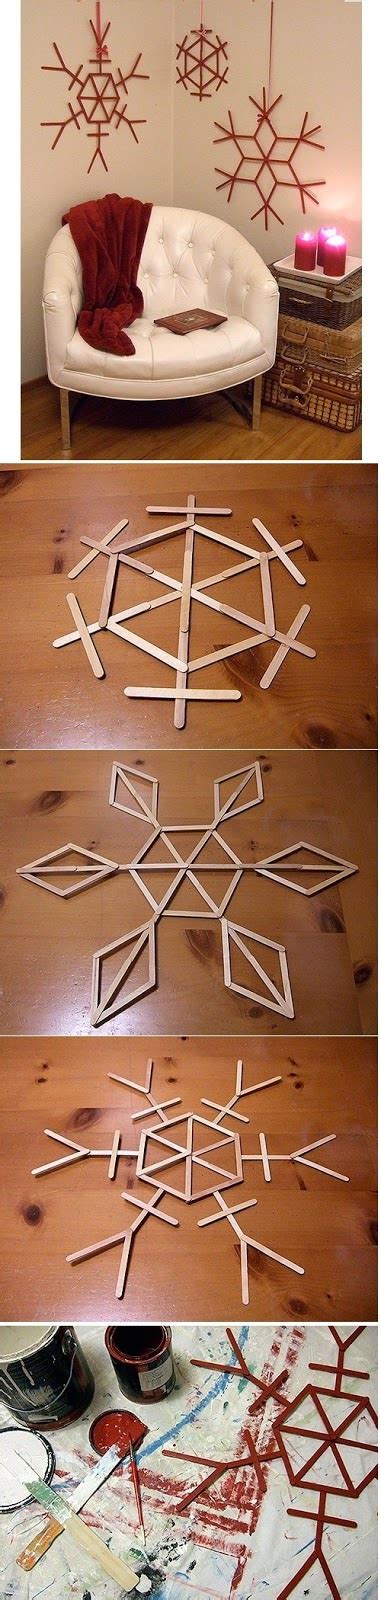 Life Fad Diy Painted Snowflake Popsicle Stick Ornaments